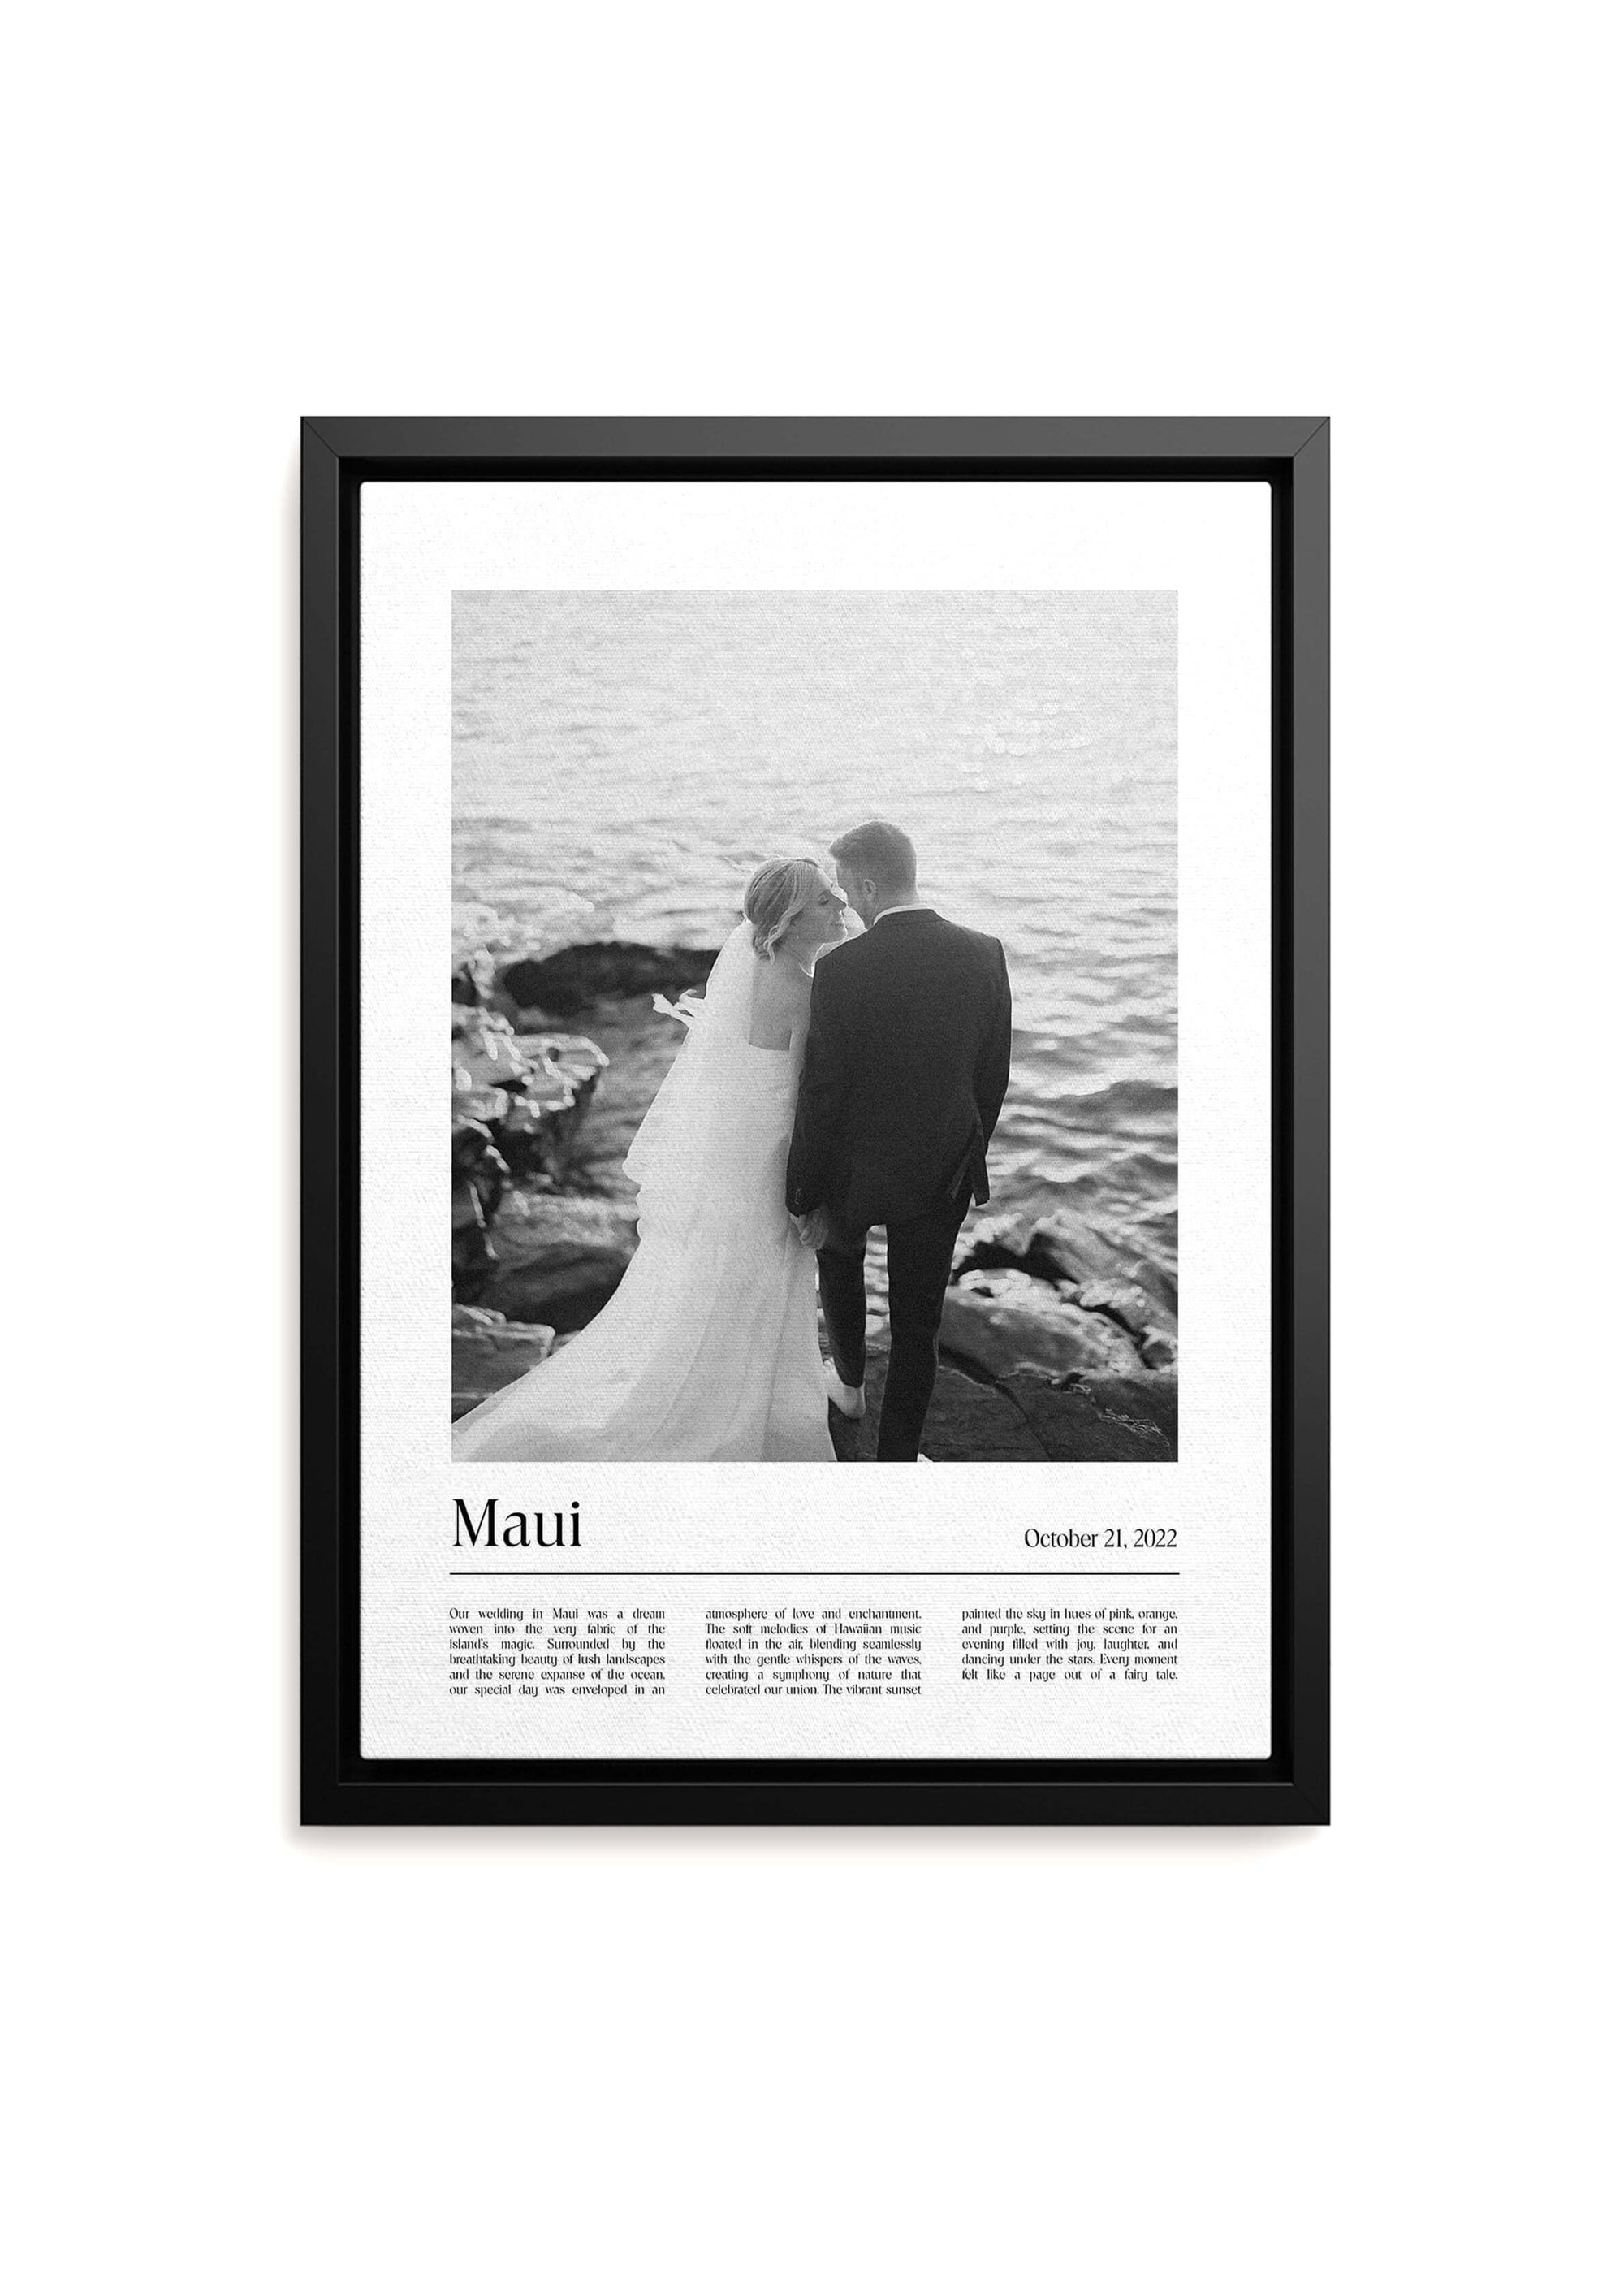 Anniversary gift canvas of a black and white photo of a wedding couple by the sea with a custom message added. The black framed canvas is on a white background.